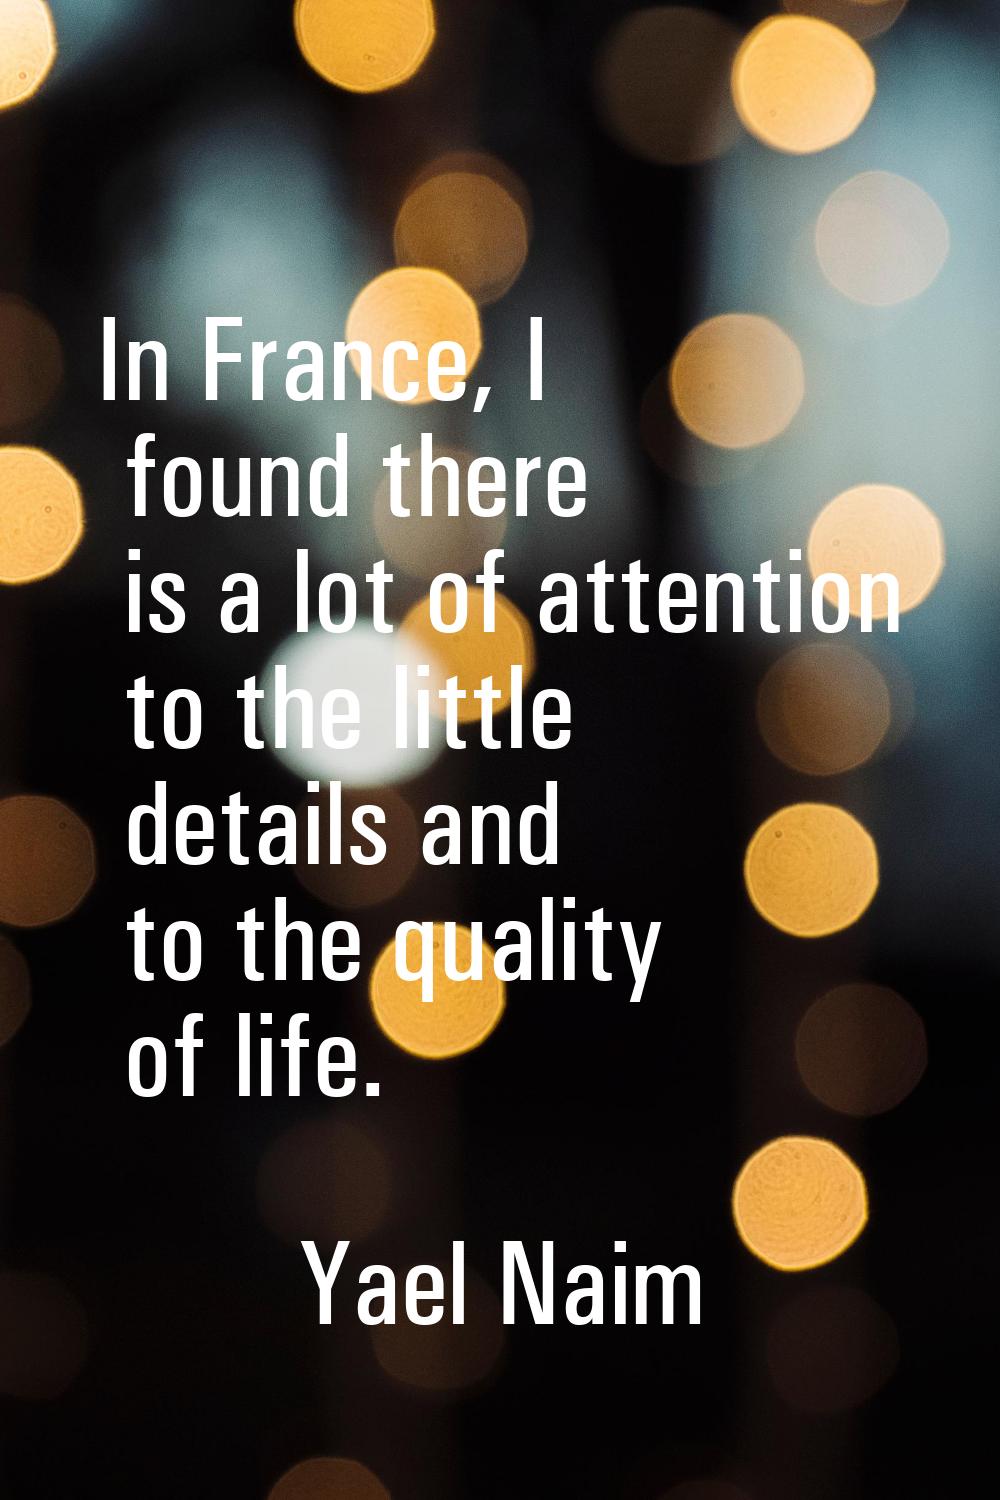 In France, I found there is a lot of attention to the little details and to the quality of life.